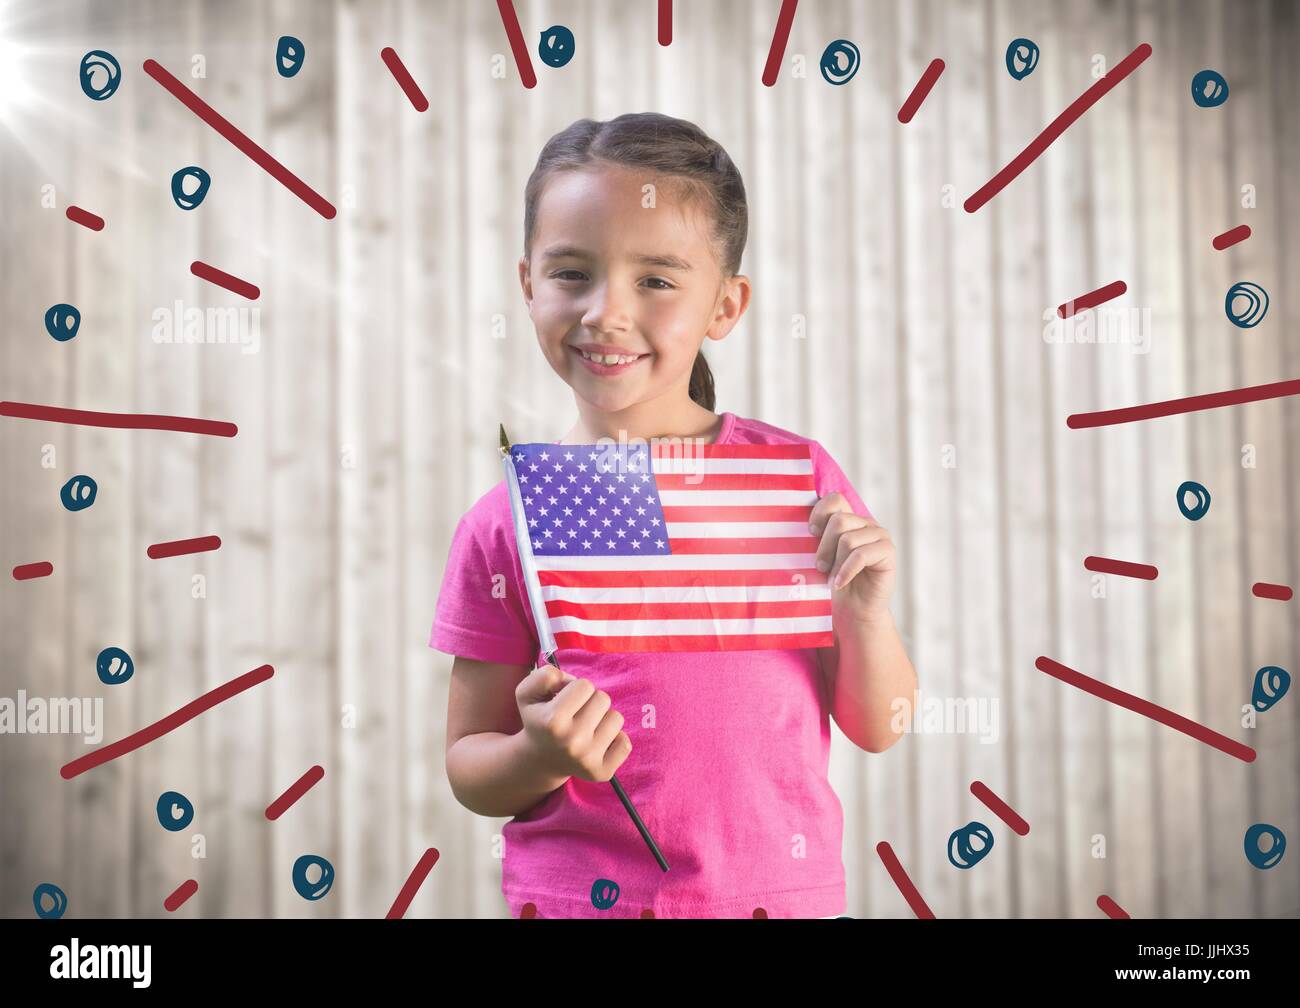 Girl holding american flag against blurry wood panel with firework doodle Stock Photo